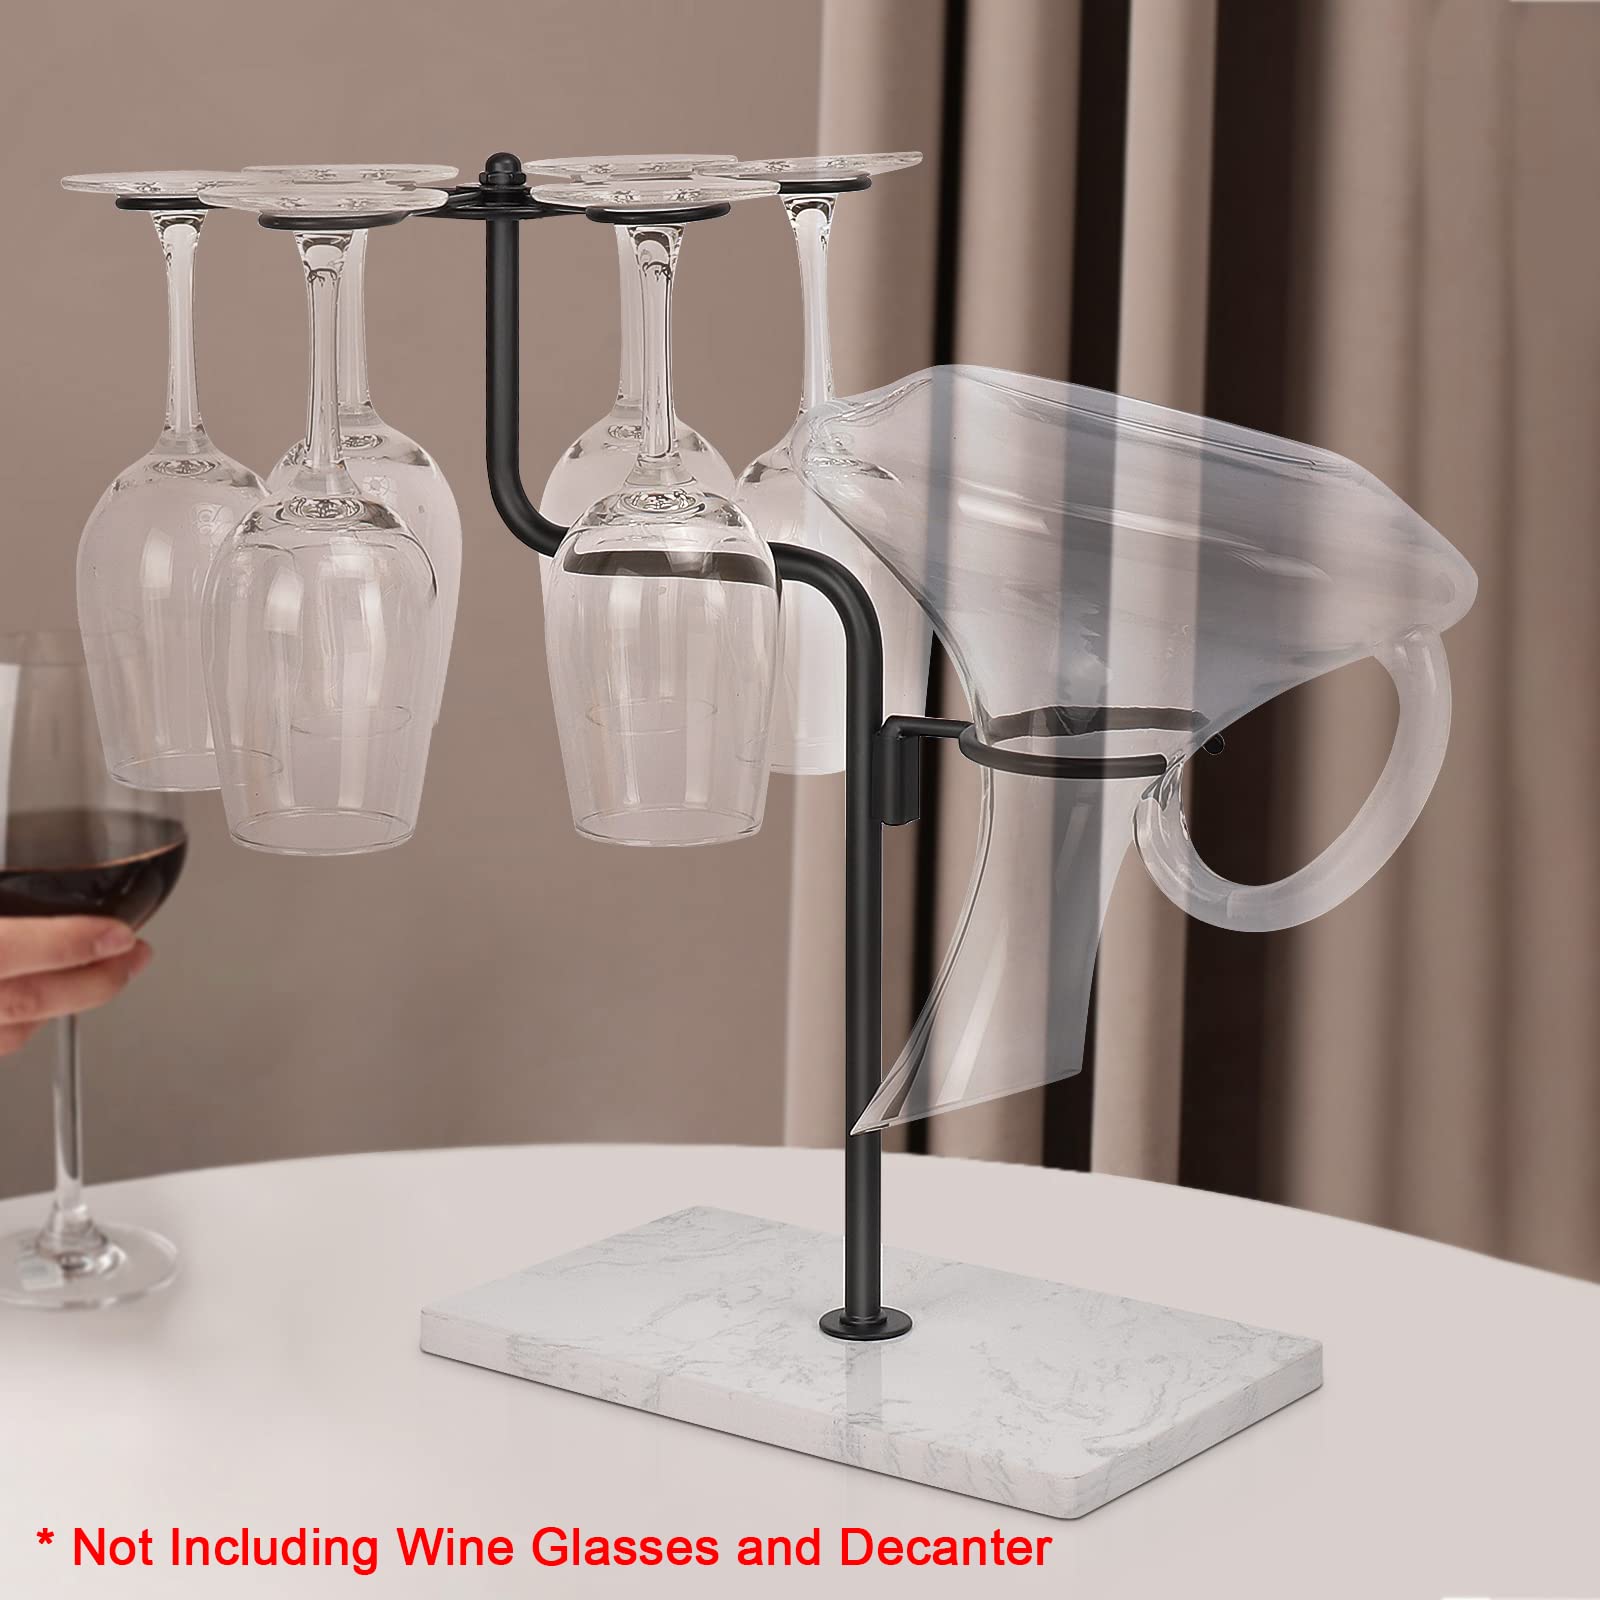 HarJue Wine Glass Holder with Marble Base, Countertop Wine Glass Rack Stand for 6 Wine Cups and 1 Decanter, Tabletop Freestanding Stemware Organizer for Kitchen Home Bar Cabinet, Matte Black